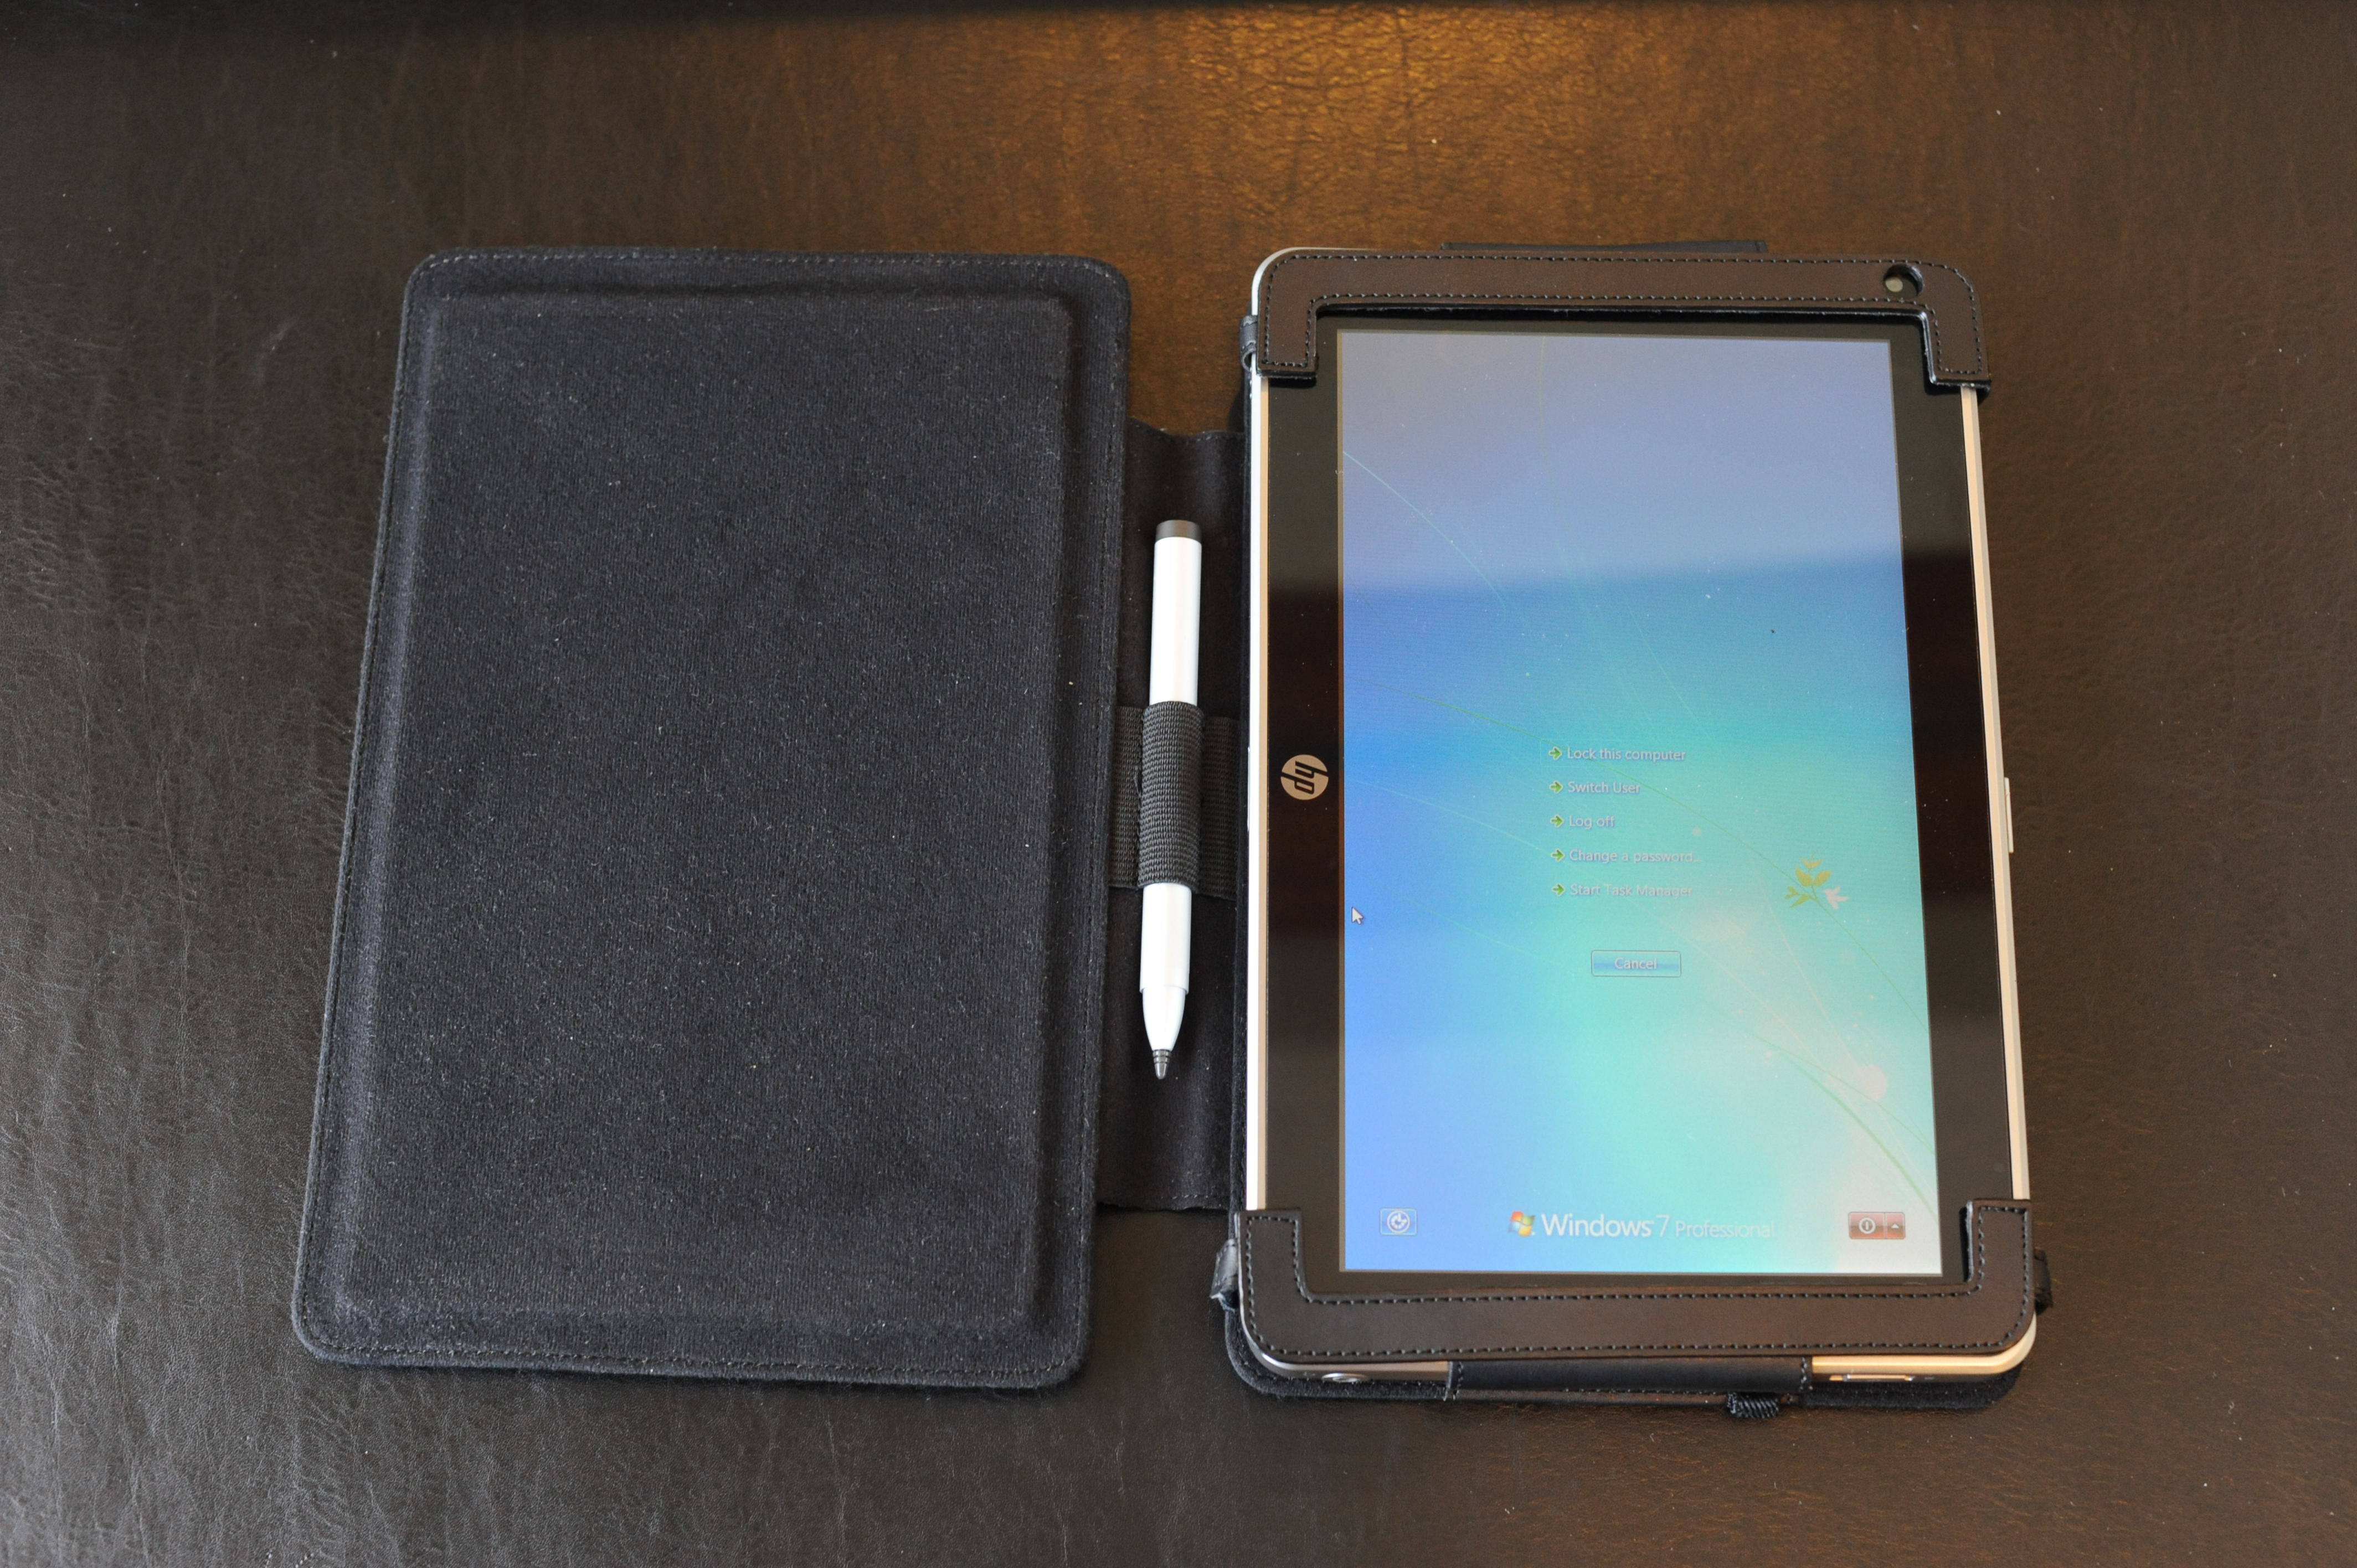 HP Slate 500 Announced - Hands on with HP's Windows 7 Slate (Video)